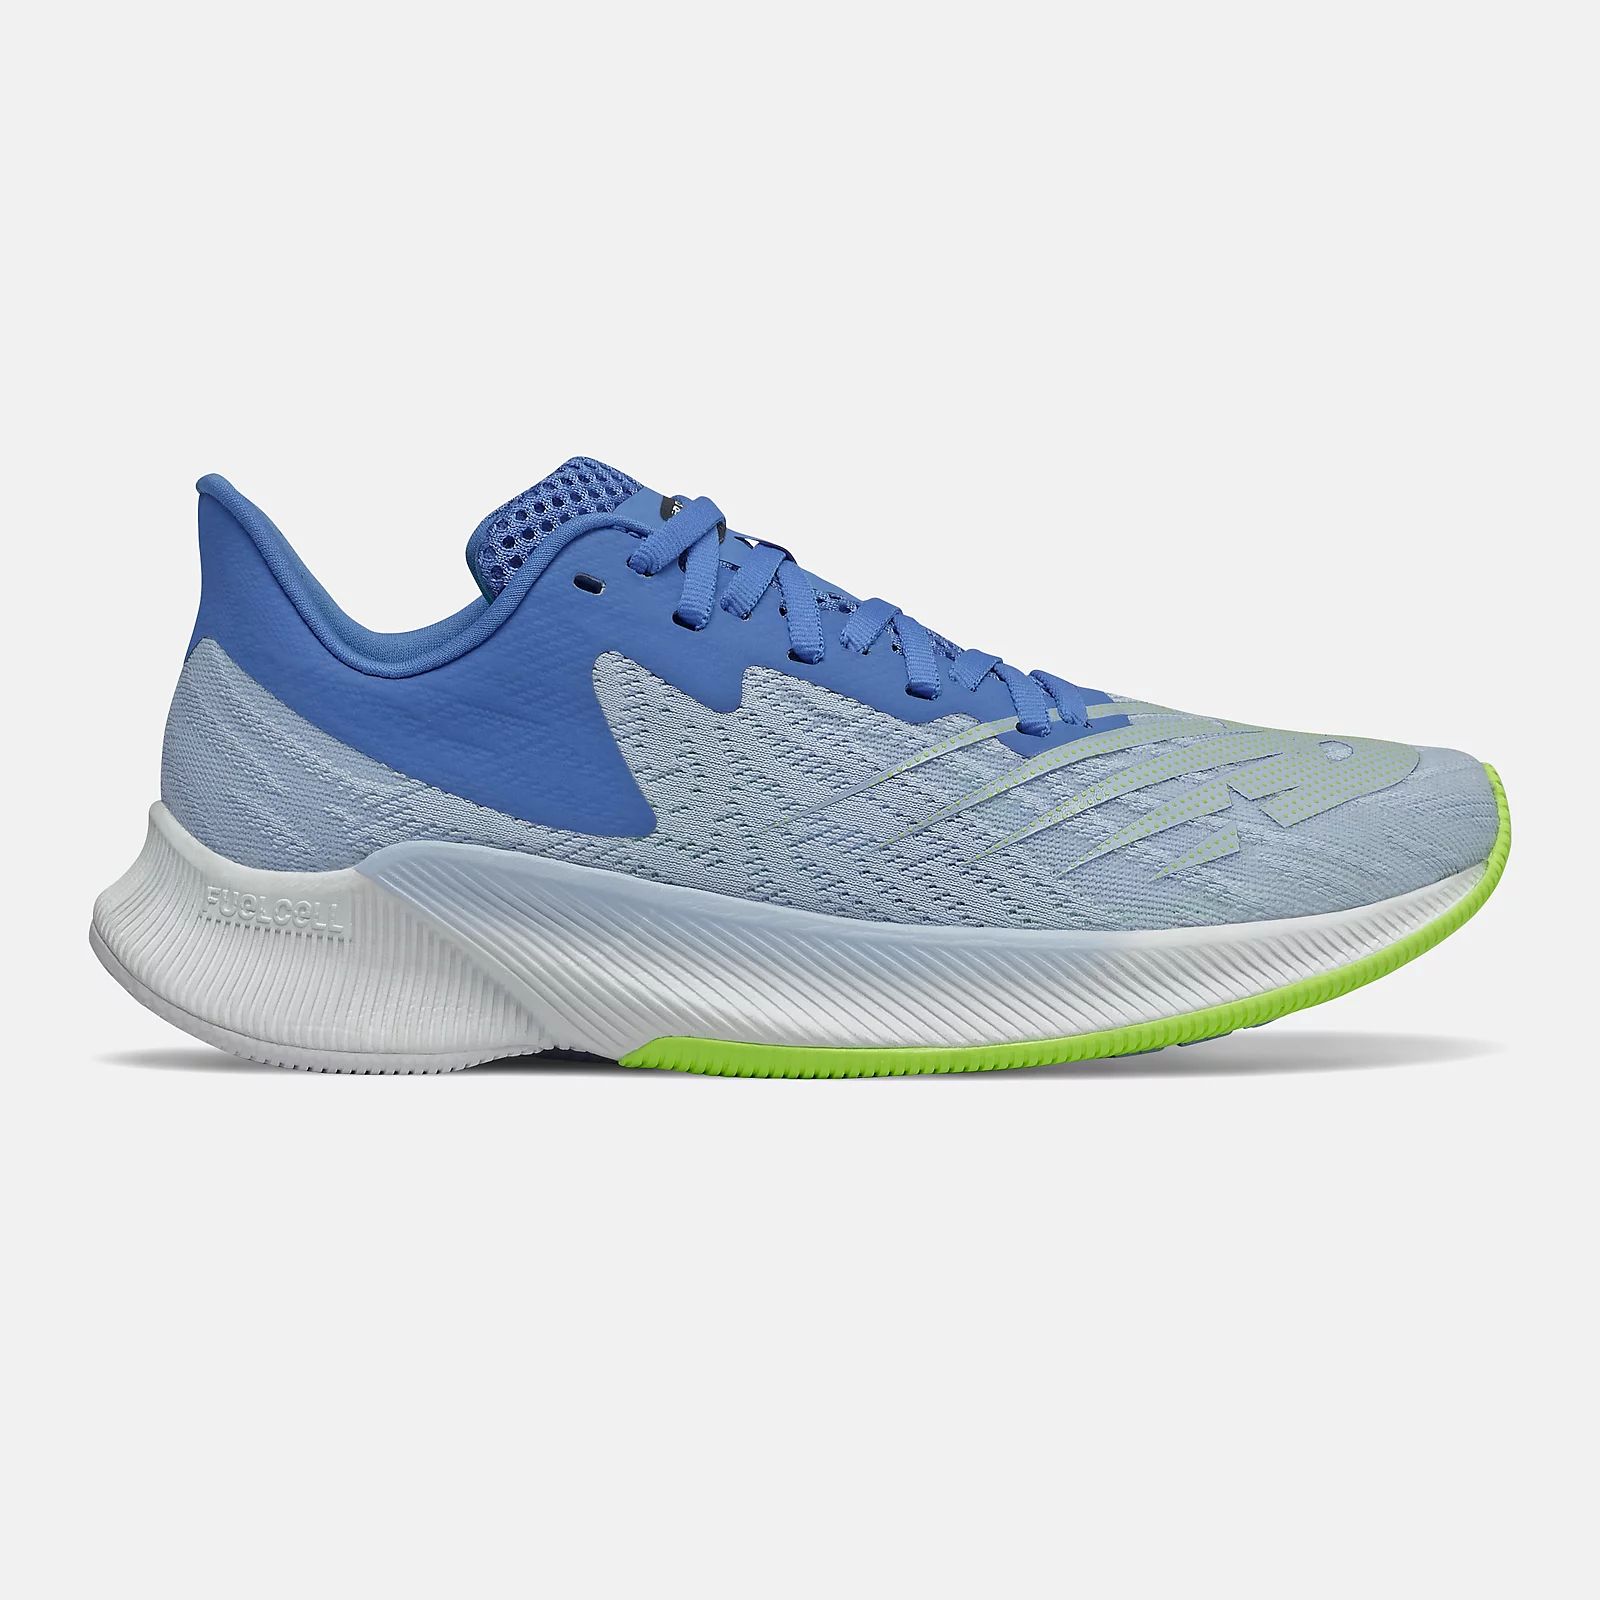 FuelCell Prism | New Balance Athletic Shoe